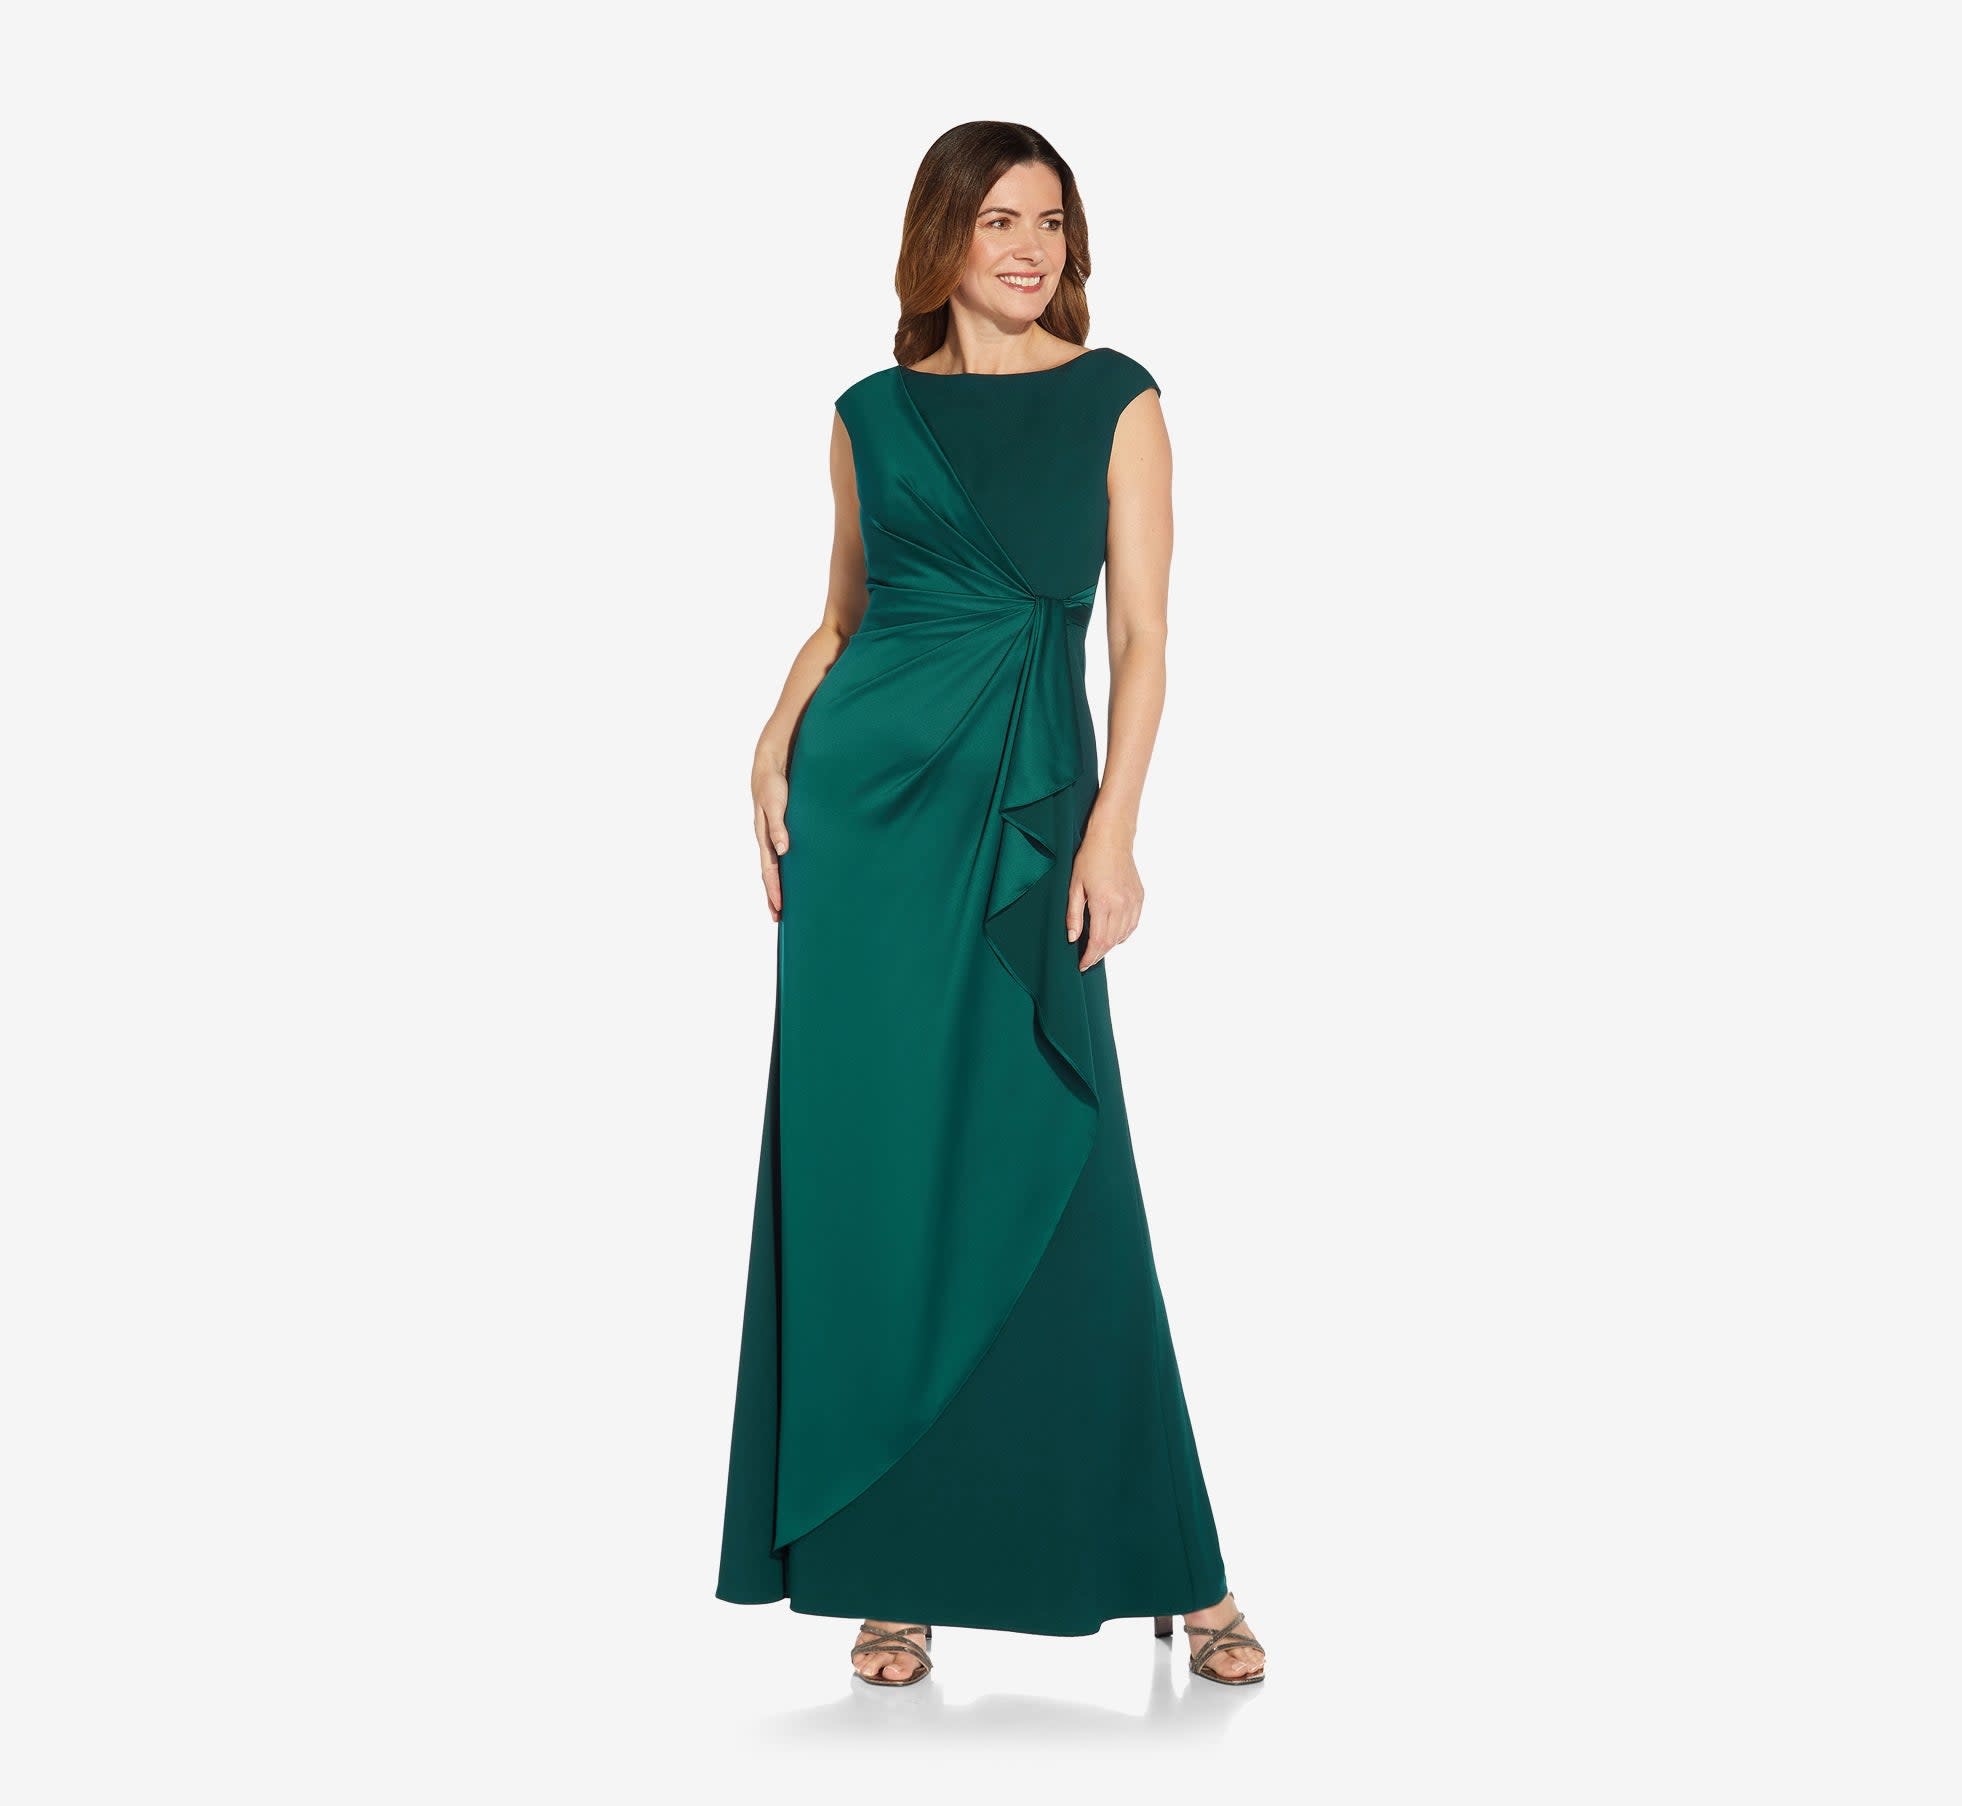 ADRIANNA PAPELL ADRIANNA PAPELL SATIN CREPE LONG GOWNS